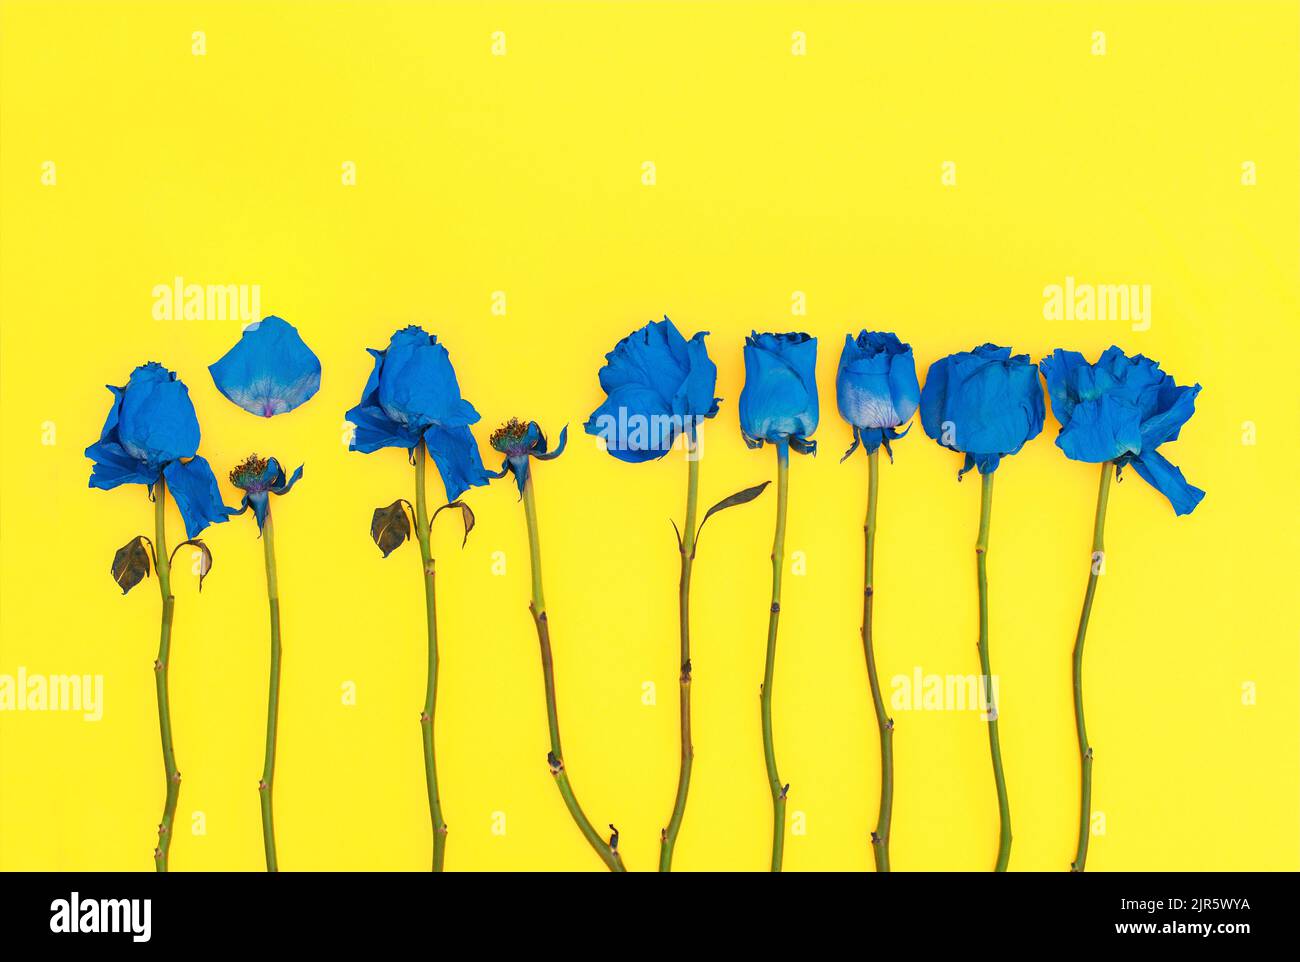 Close up of blue blooming flowers over yellow background. Concept Ukrainian symbol. Stock Photo